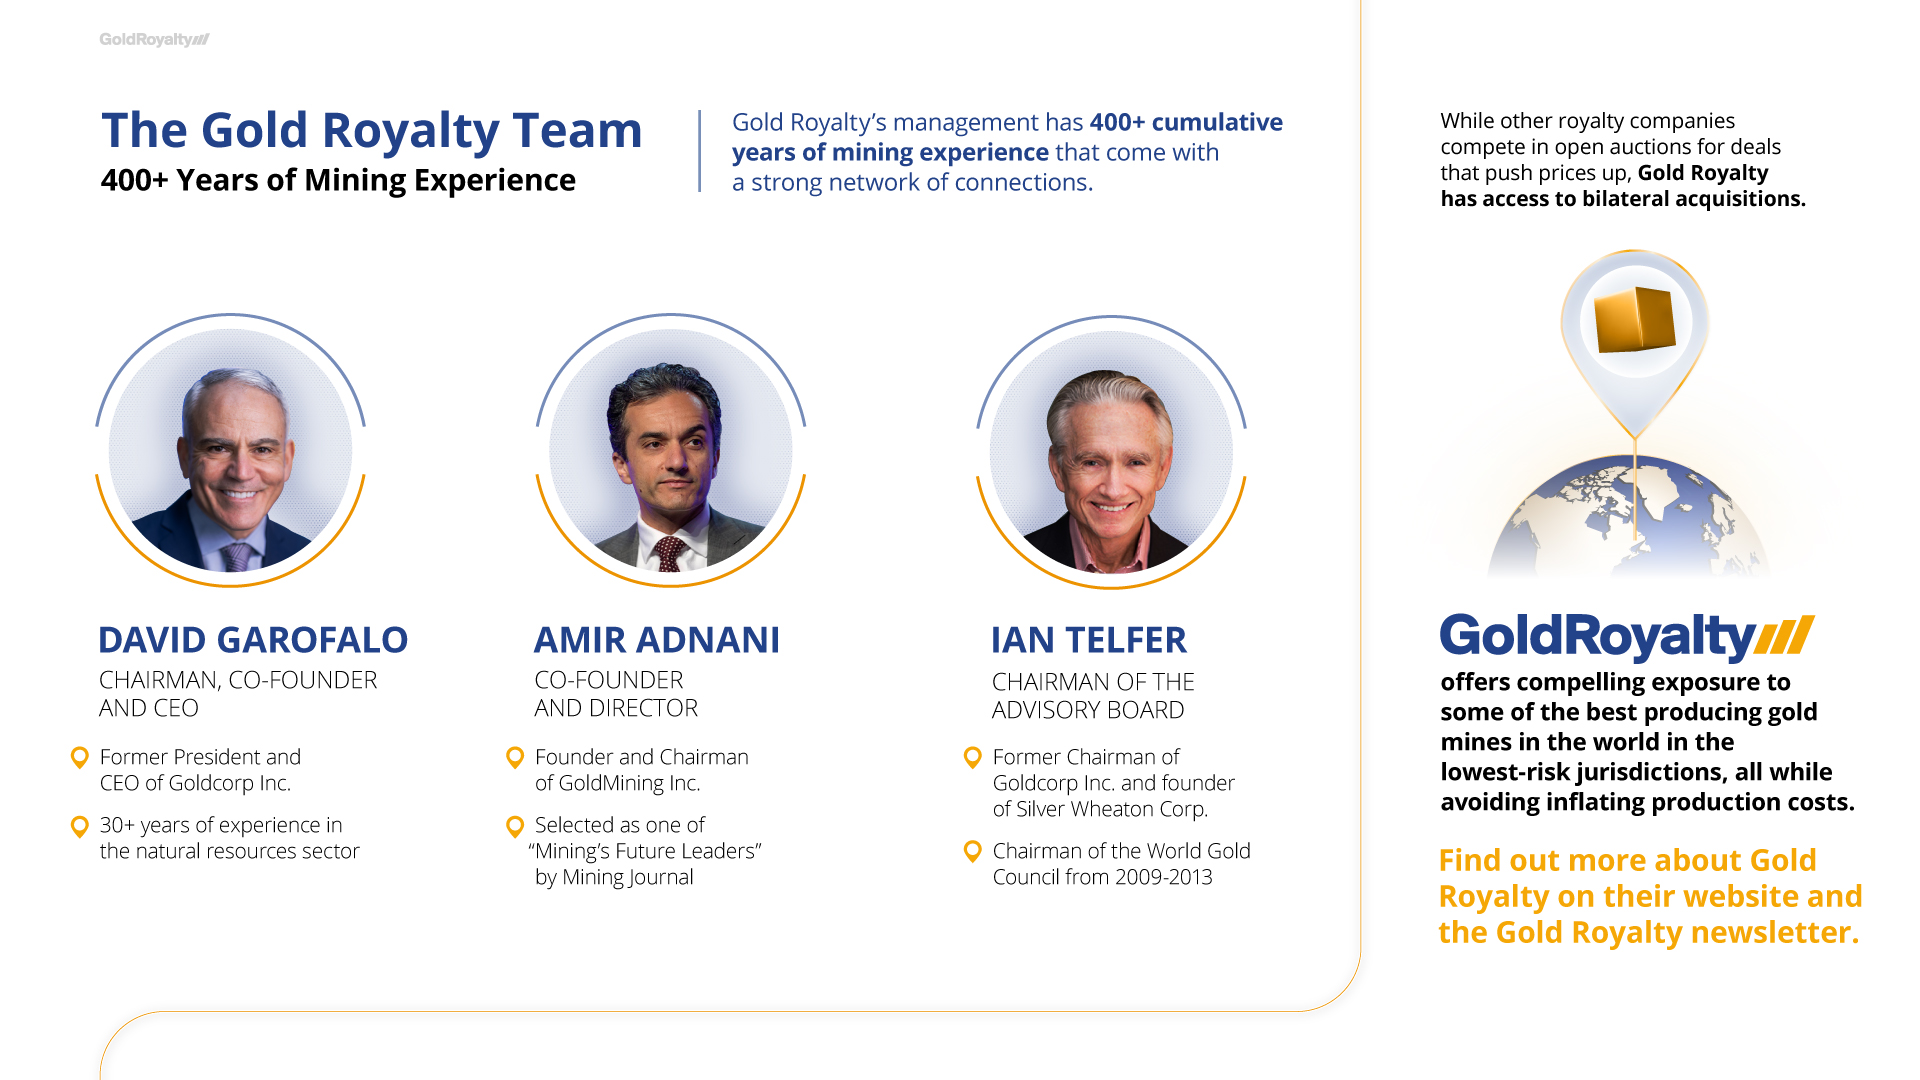 Gold Royalty Corp management team, with a combined 400+ years experience among the Co-founders and Chairman of the Advisory Board.